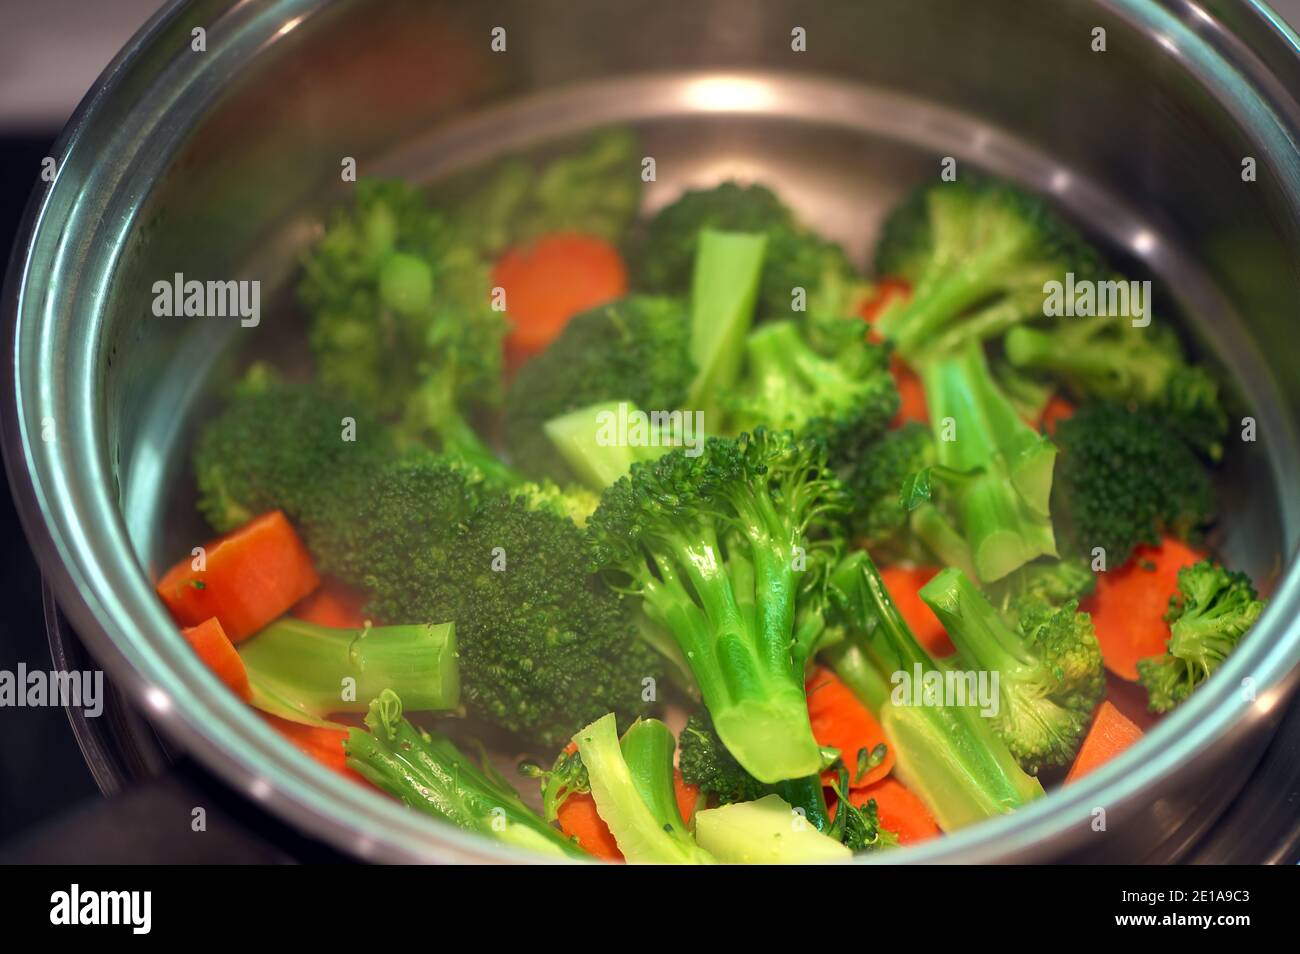 Steamed broccoli and carrots in a stainless steel double boiler on the stove top. Stock Photo